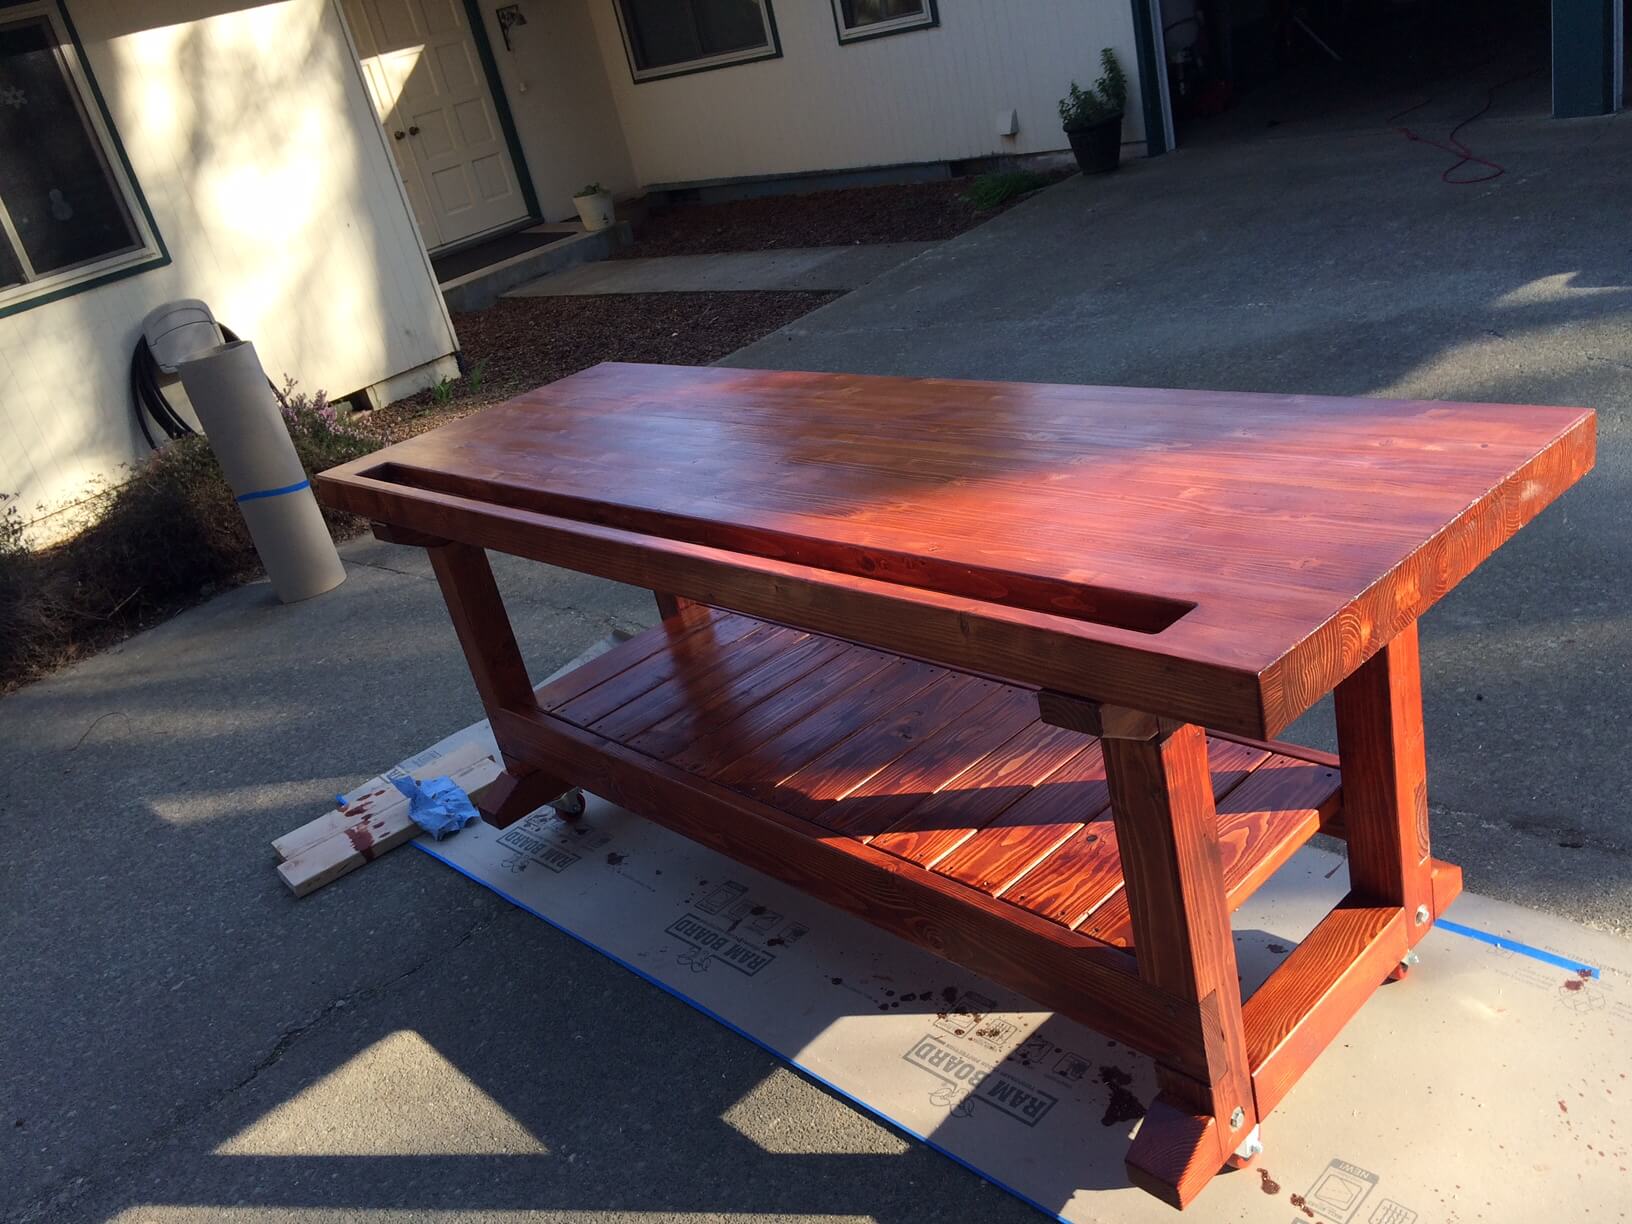 Build your own workbench for the patio